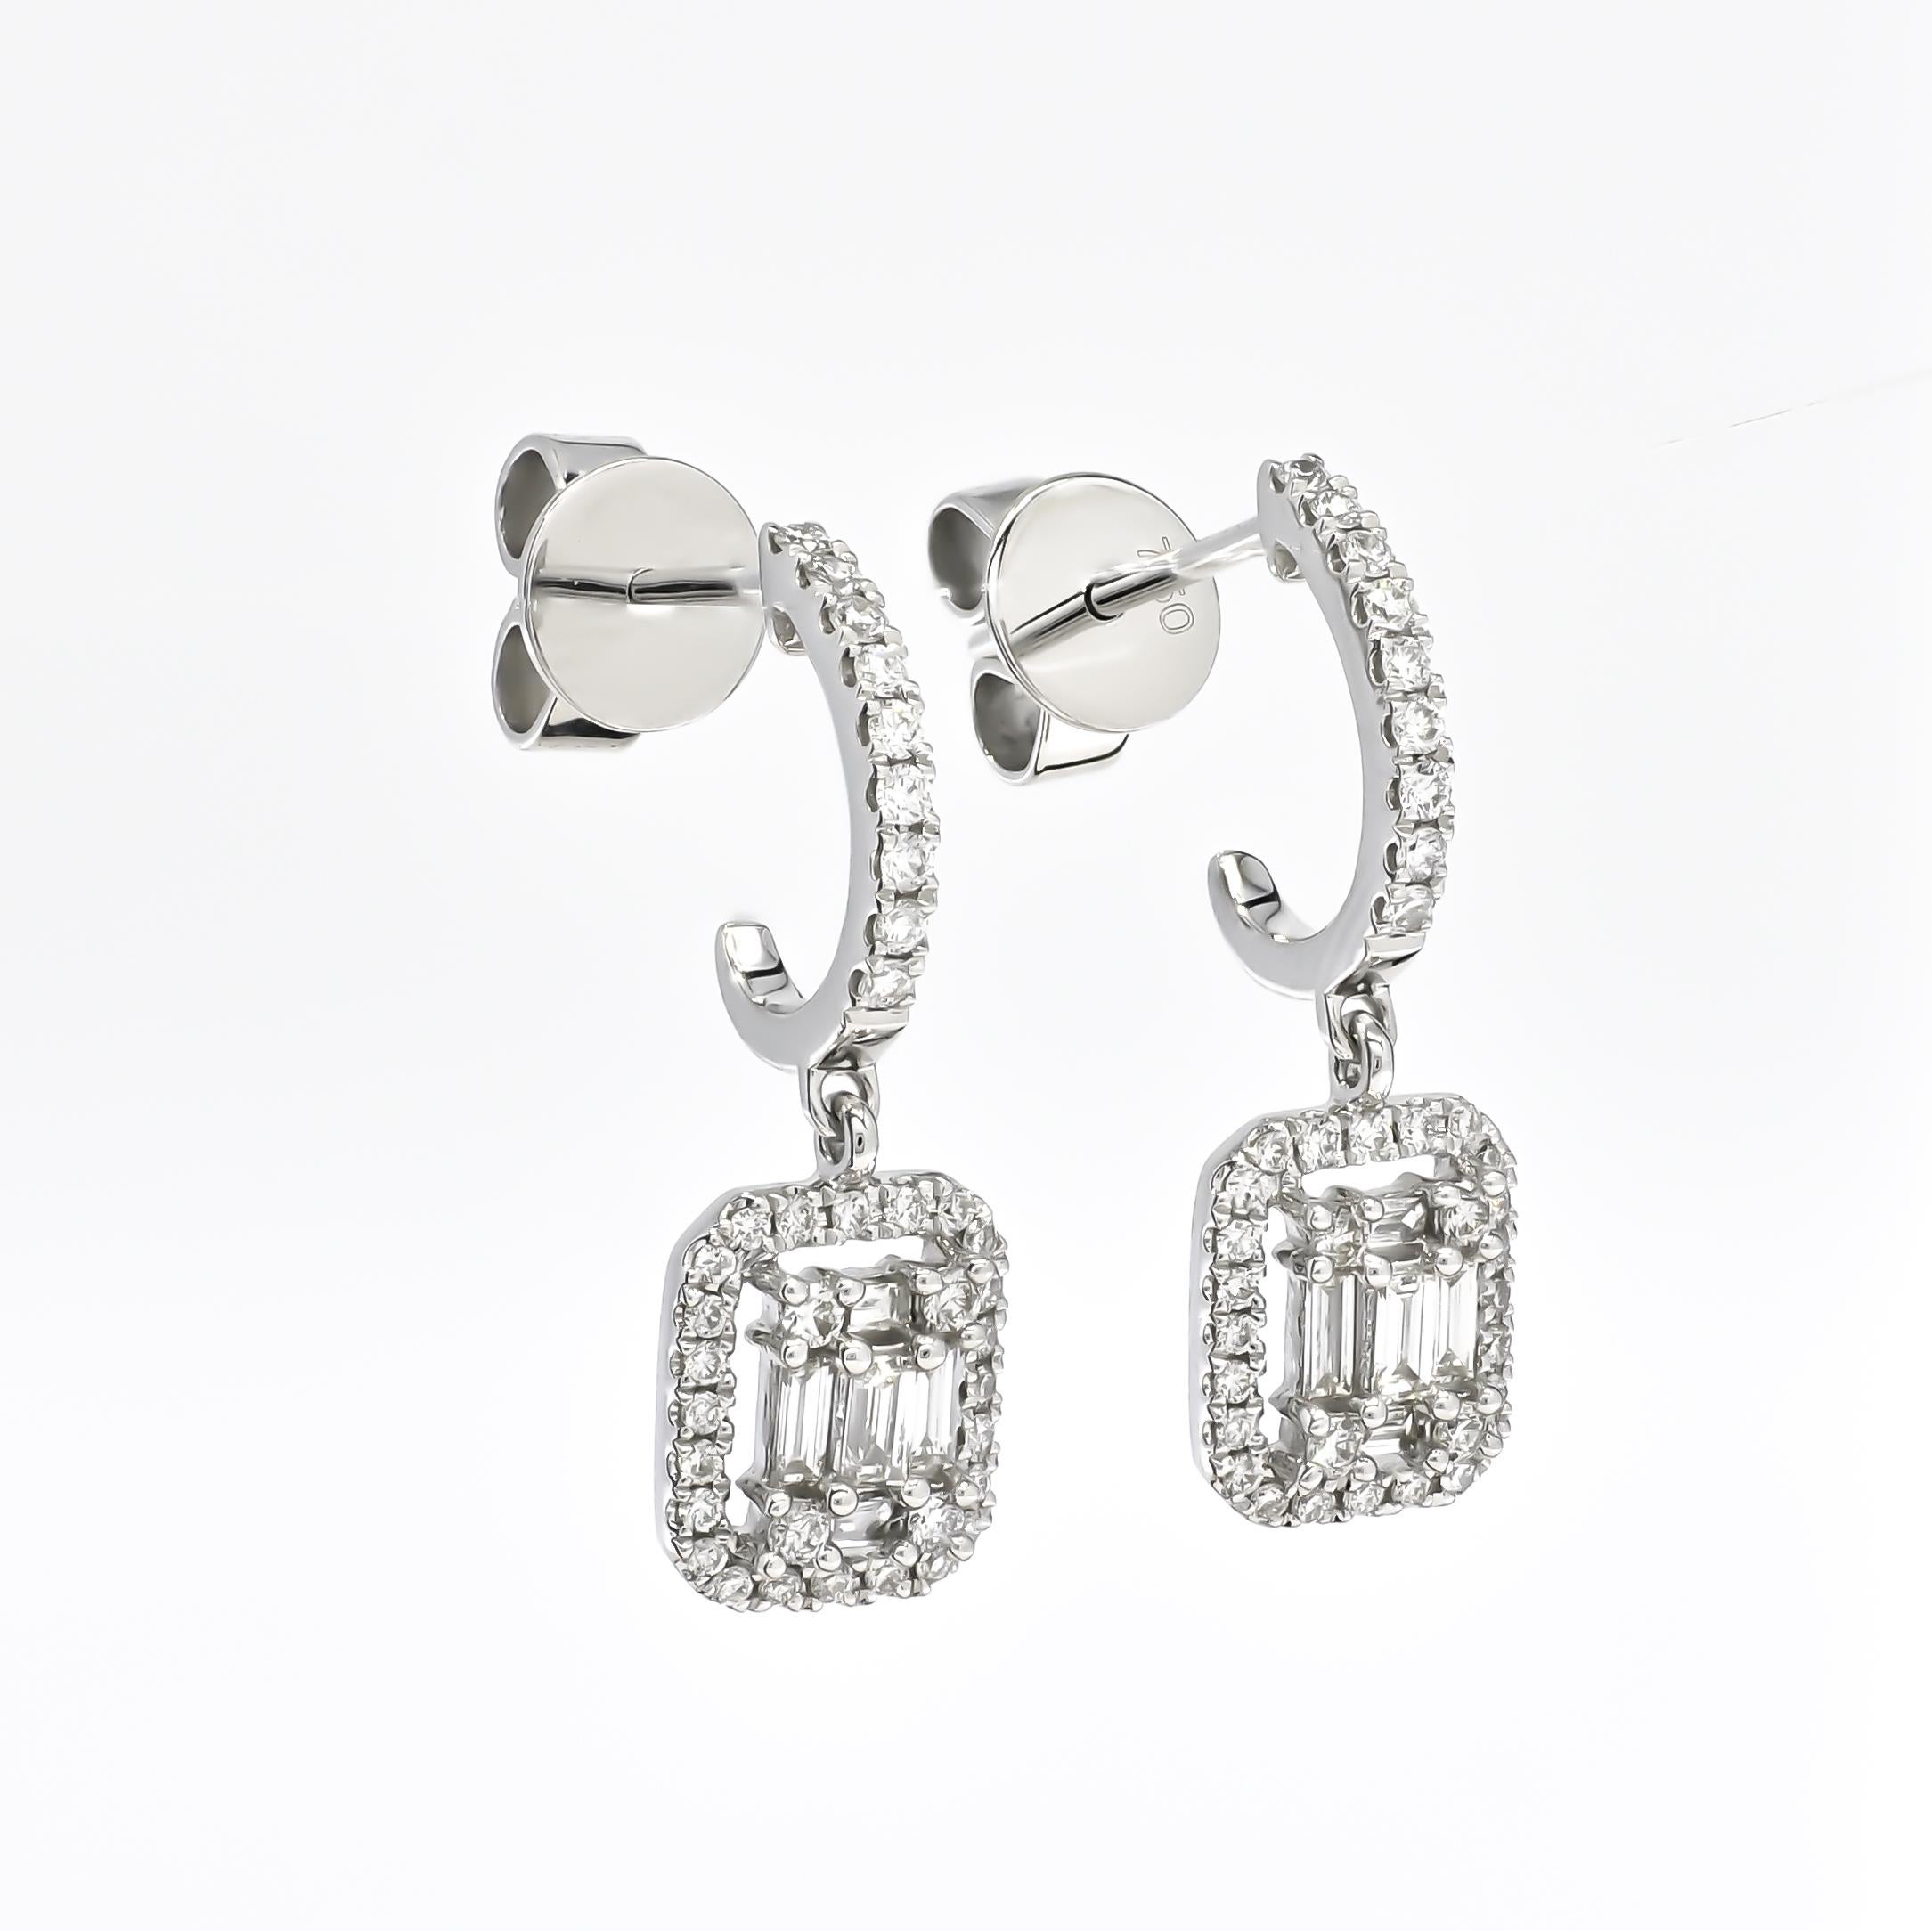 
Add a little bit of luxury to your ear party this season with this sparkling Earring to you Half hoop Halo Drop Earring collection. 

Metal: 18KT White Gold  
Weight:3.13 Grams
Gemstones: Natural Diamonds
Number of Diamonds: 84
Shape: Round